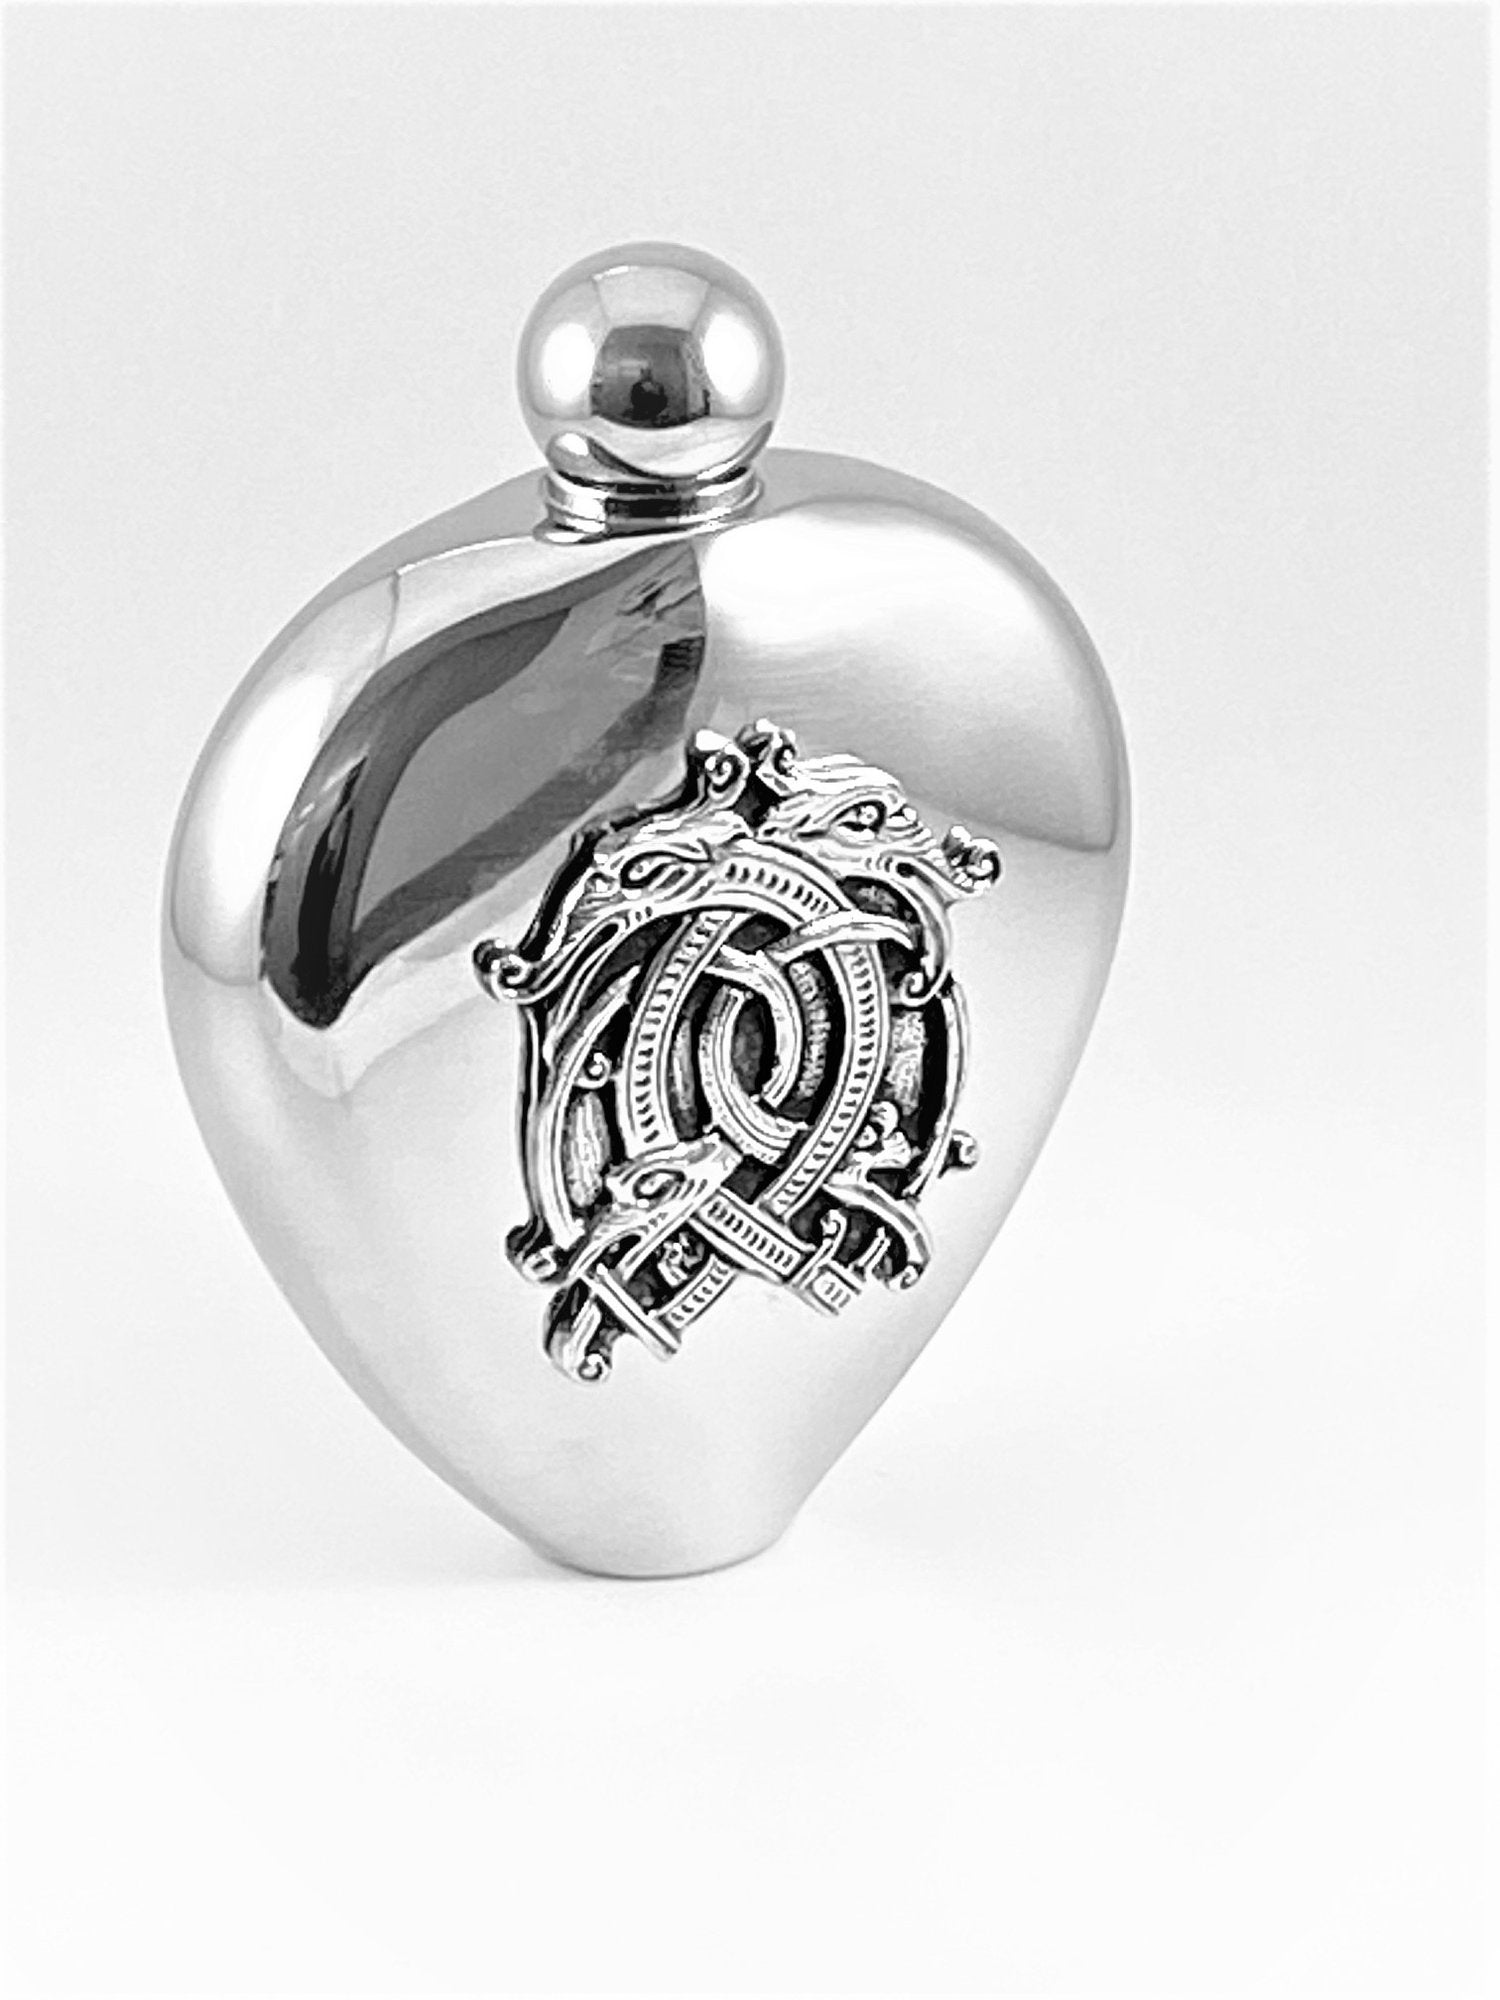 Stainless Steel and Pewter 6 oz Whisky Serpent Flask